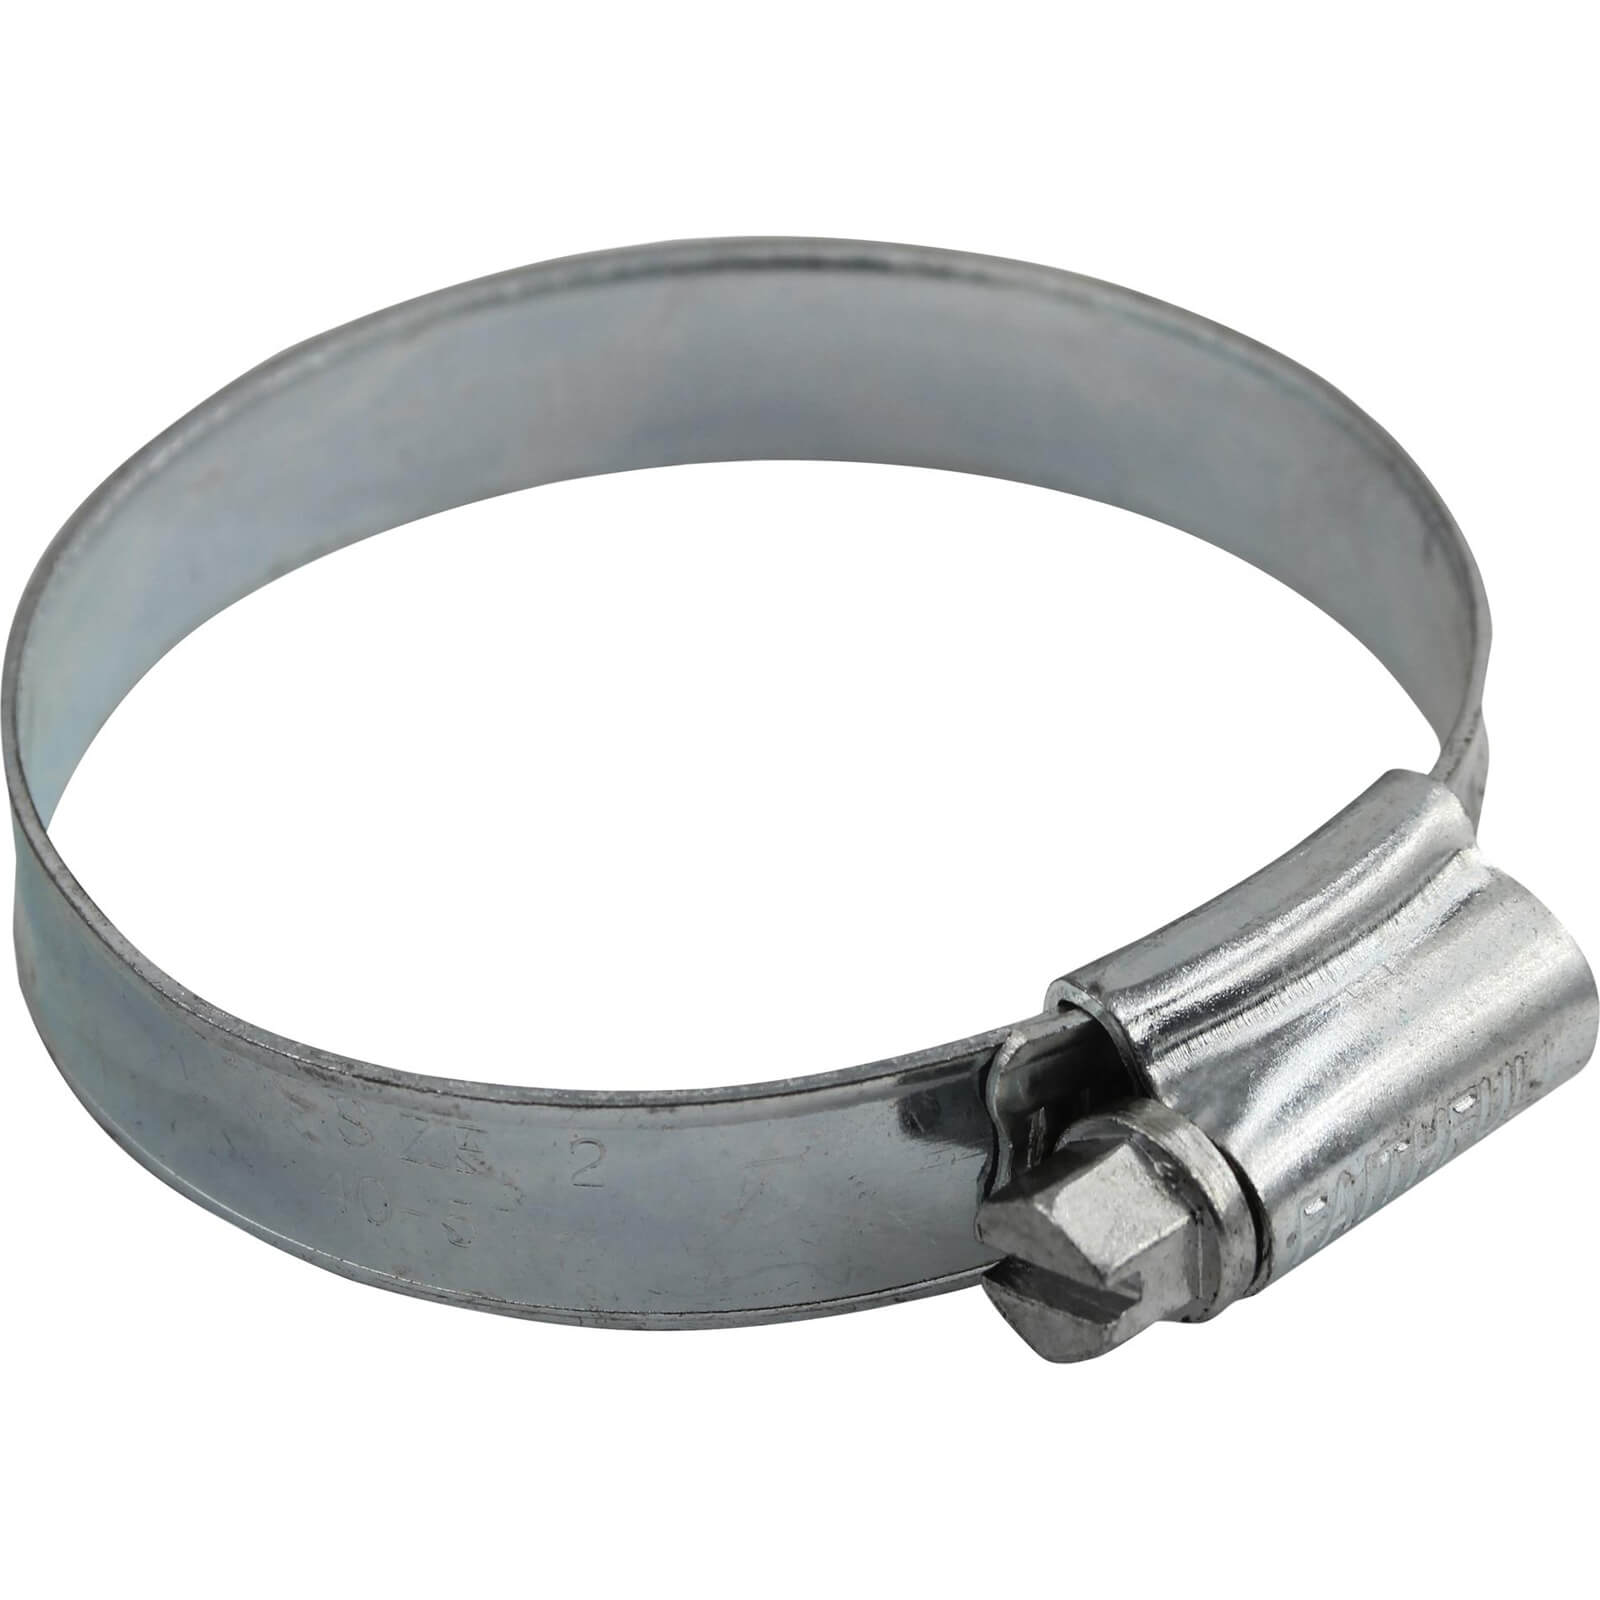 Image of Faithfull Zinc Plated Hose Clips 40mm - 55mm Pack of 1